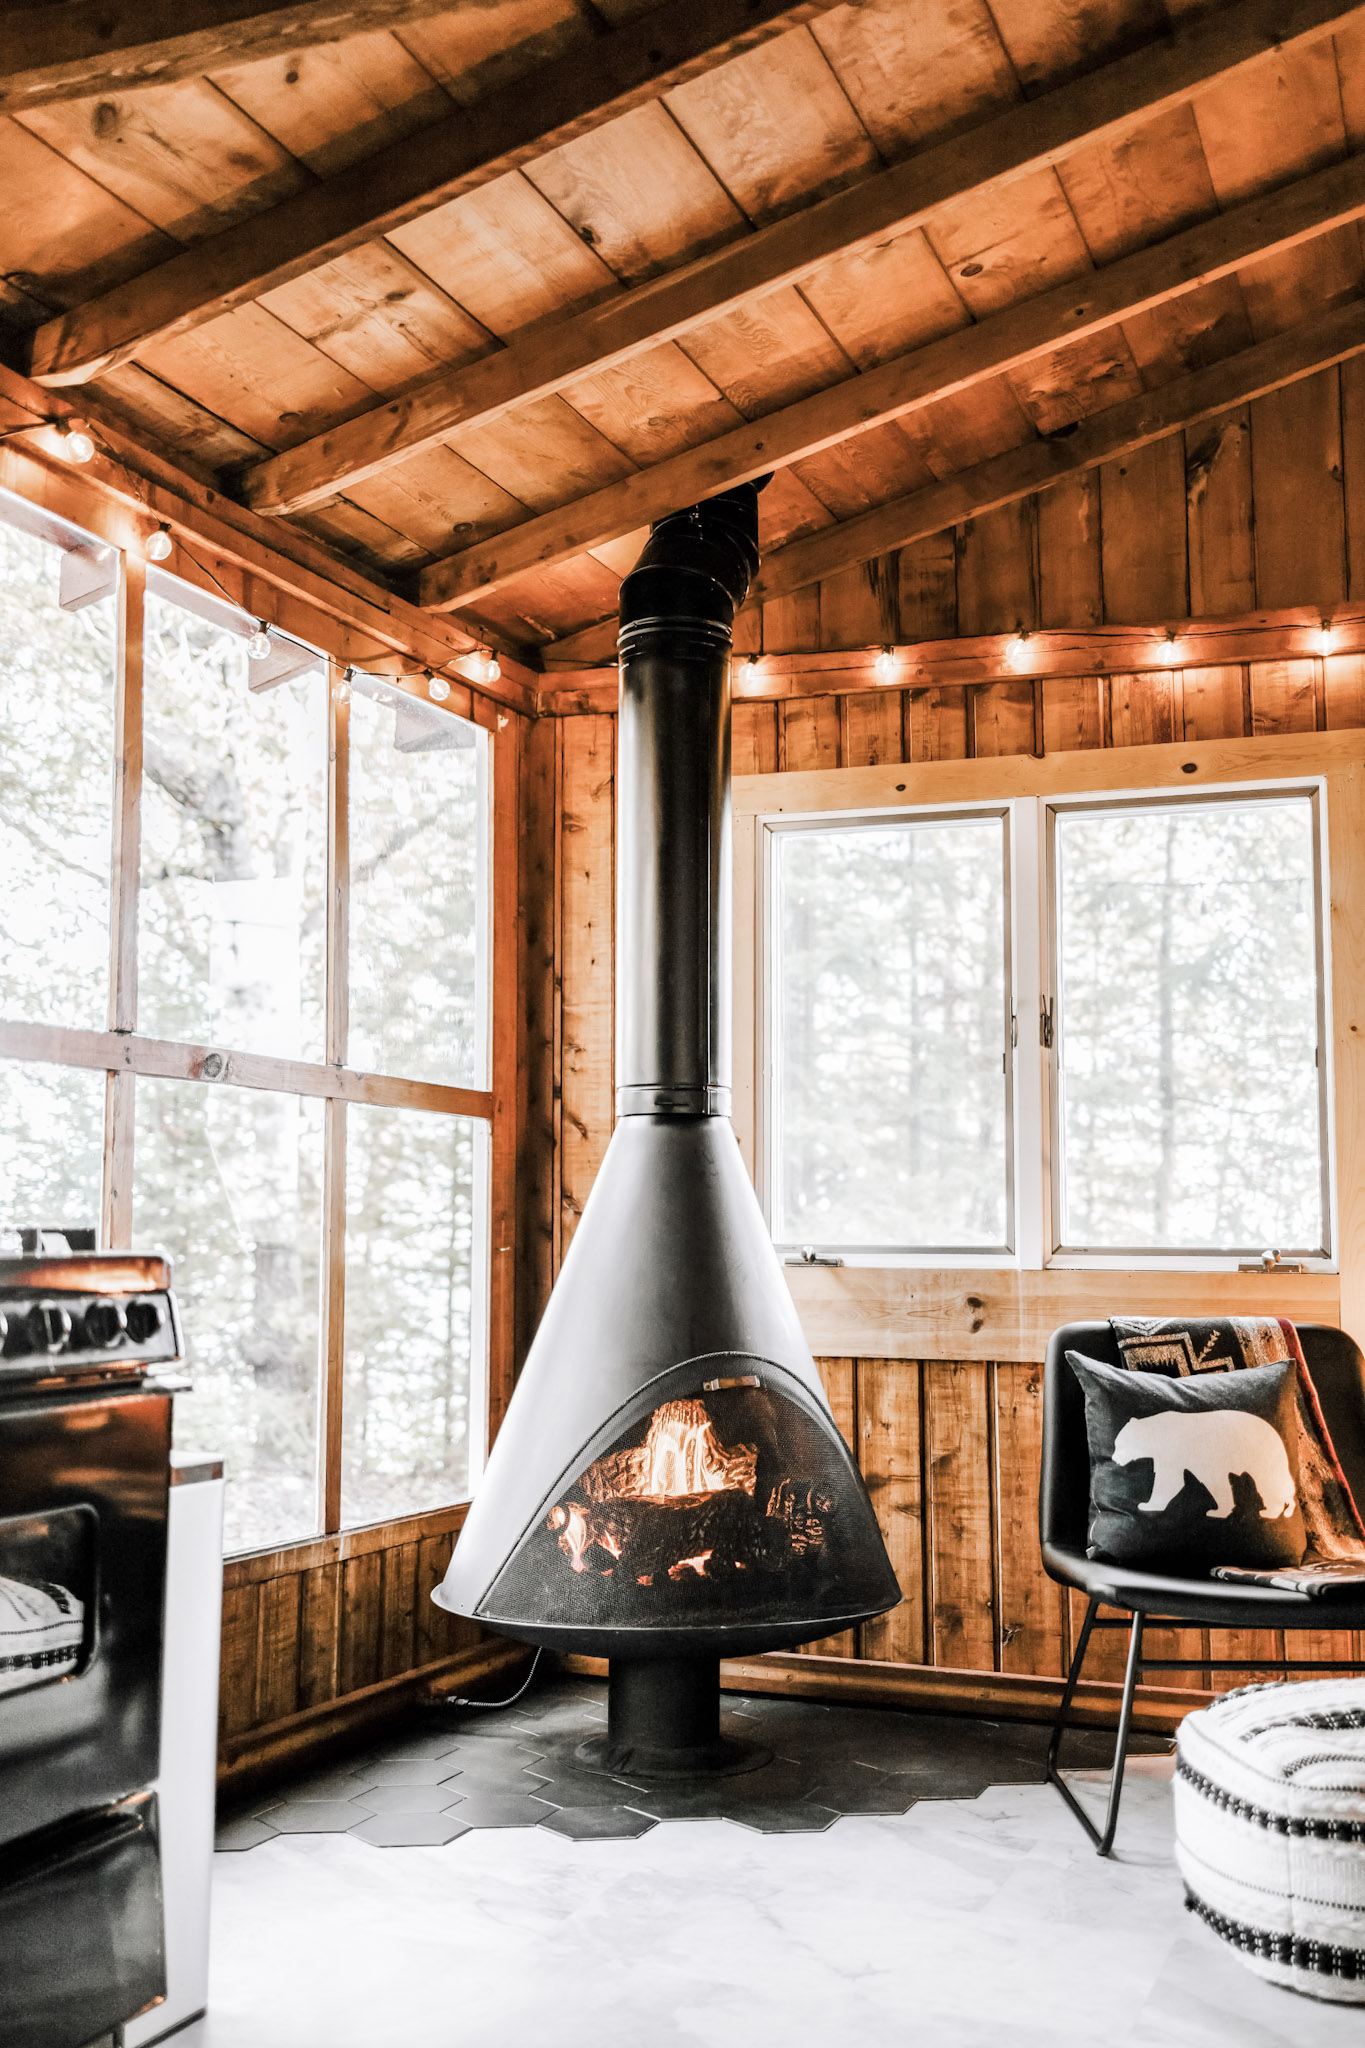 A warm cabin with a stove fireplace. This article covers and answers how environmentally friendly is your home heating?